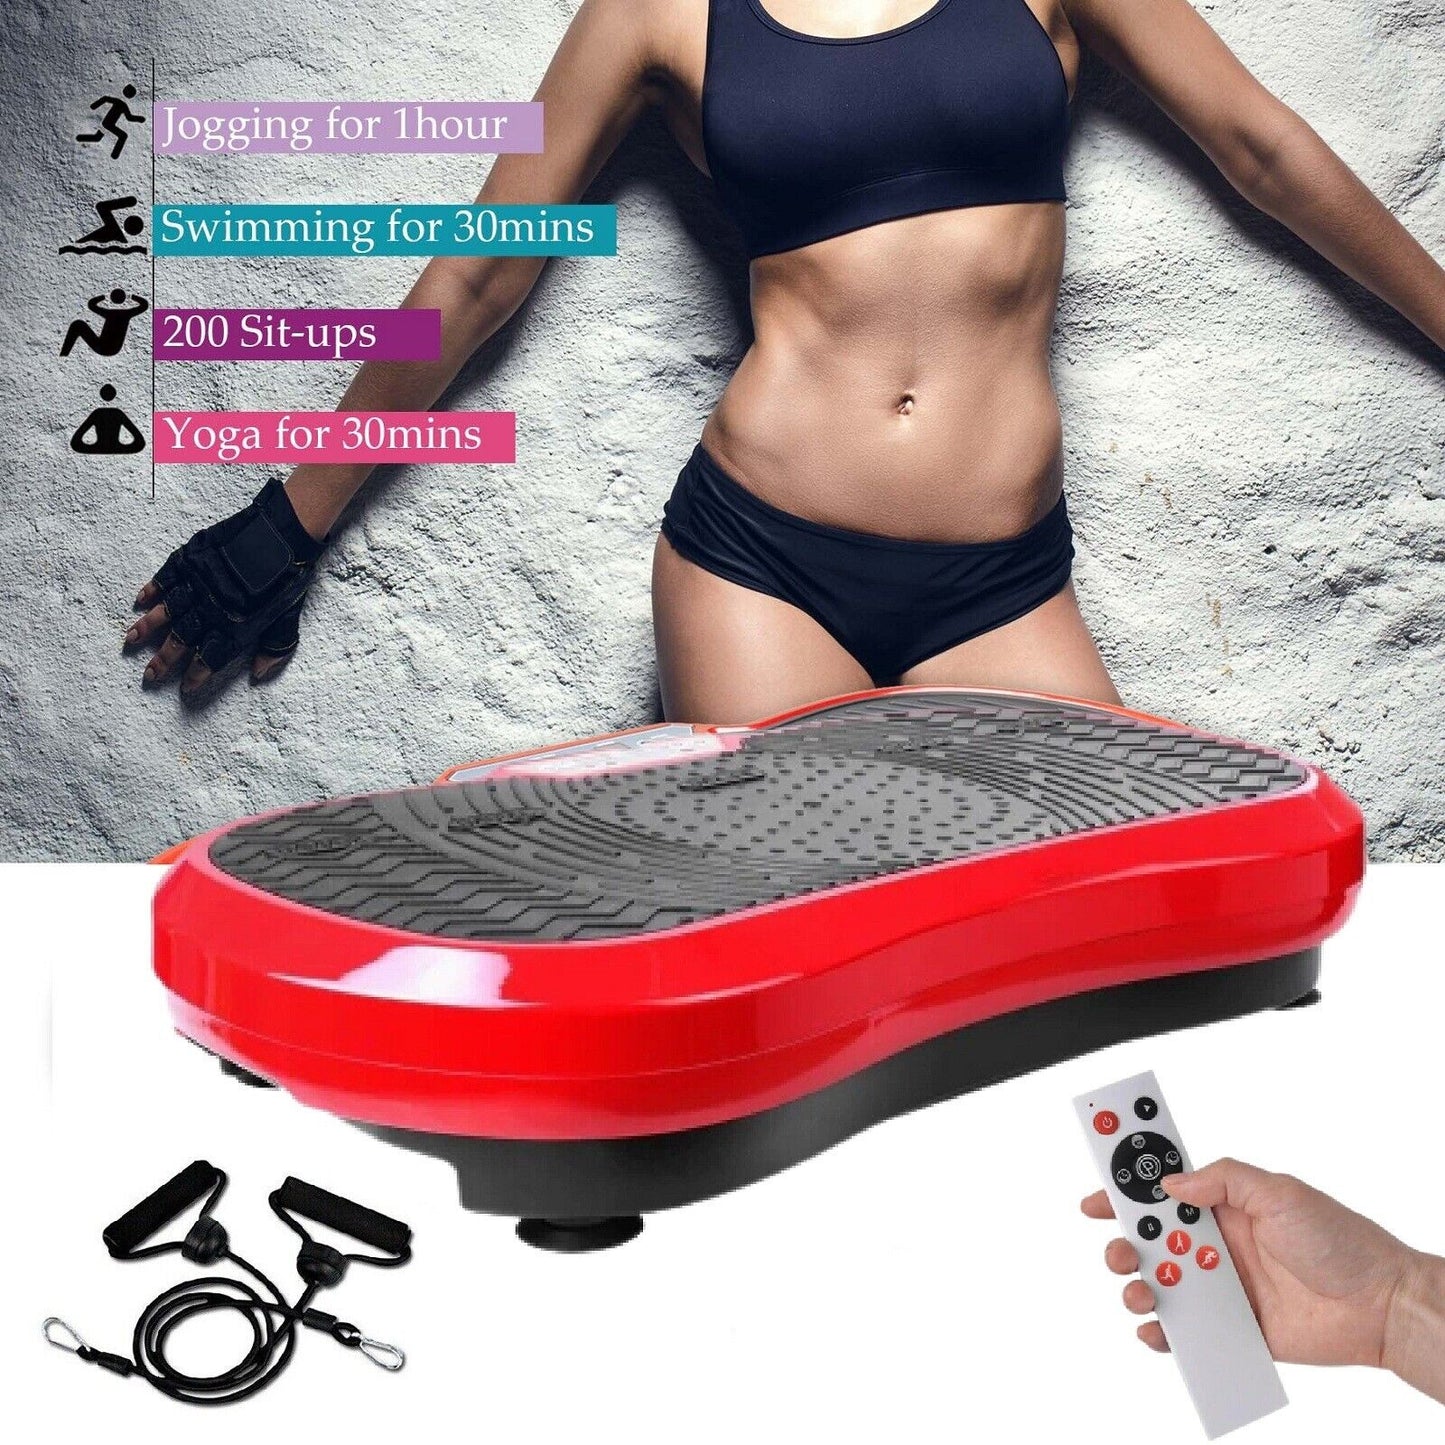 Portable Vibration Machine for Weight Loss & Toning